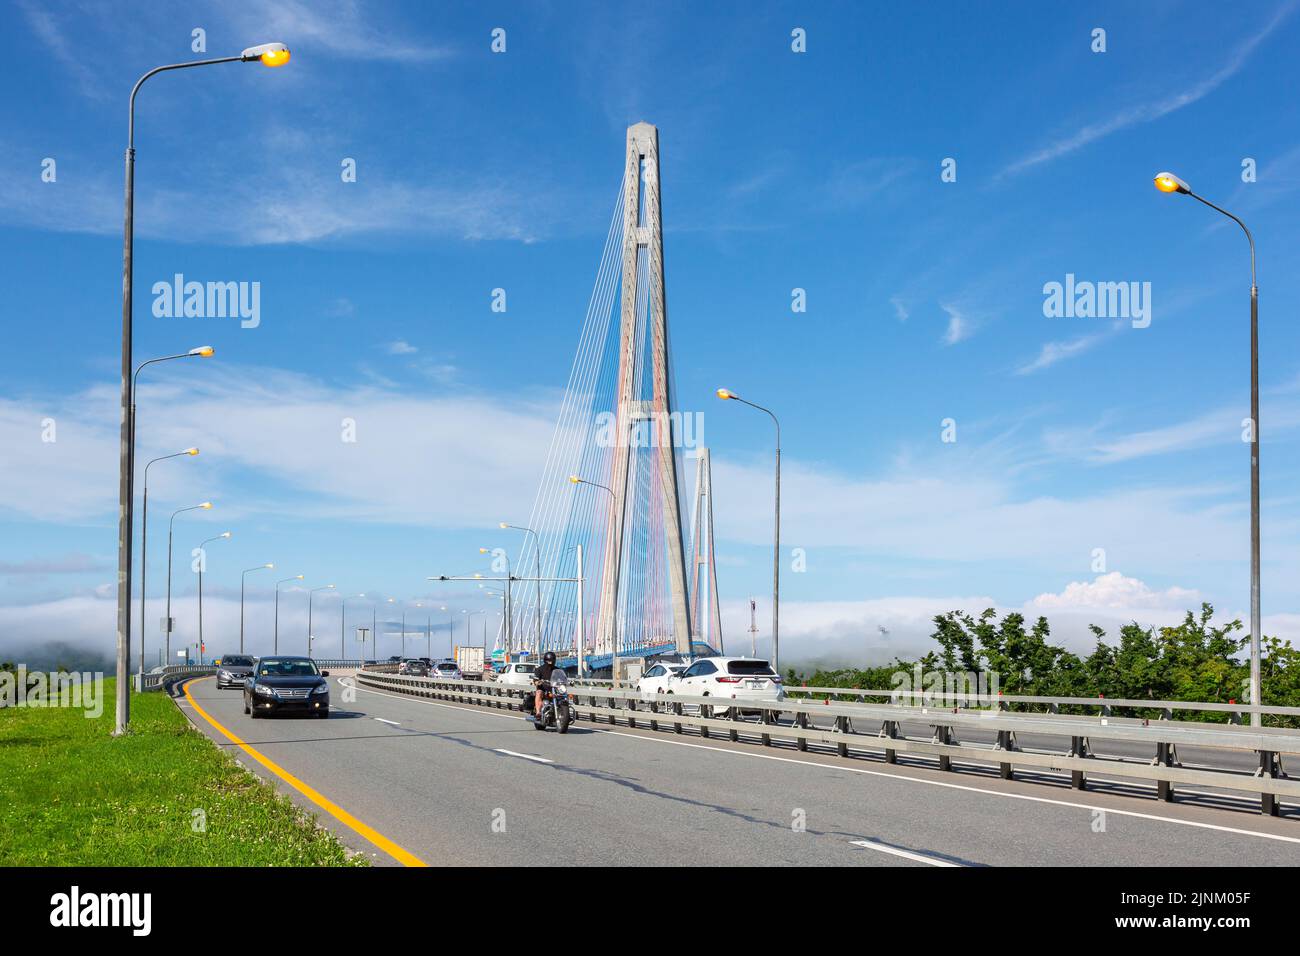 Cars drivind along the Cable-stayed Russky Bridge to island Russkiy in Vladivostok, Primorsky Krai, Russia Stock Photo